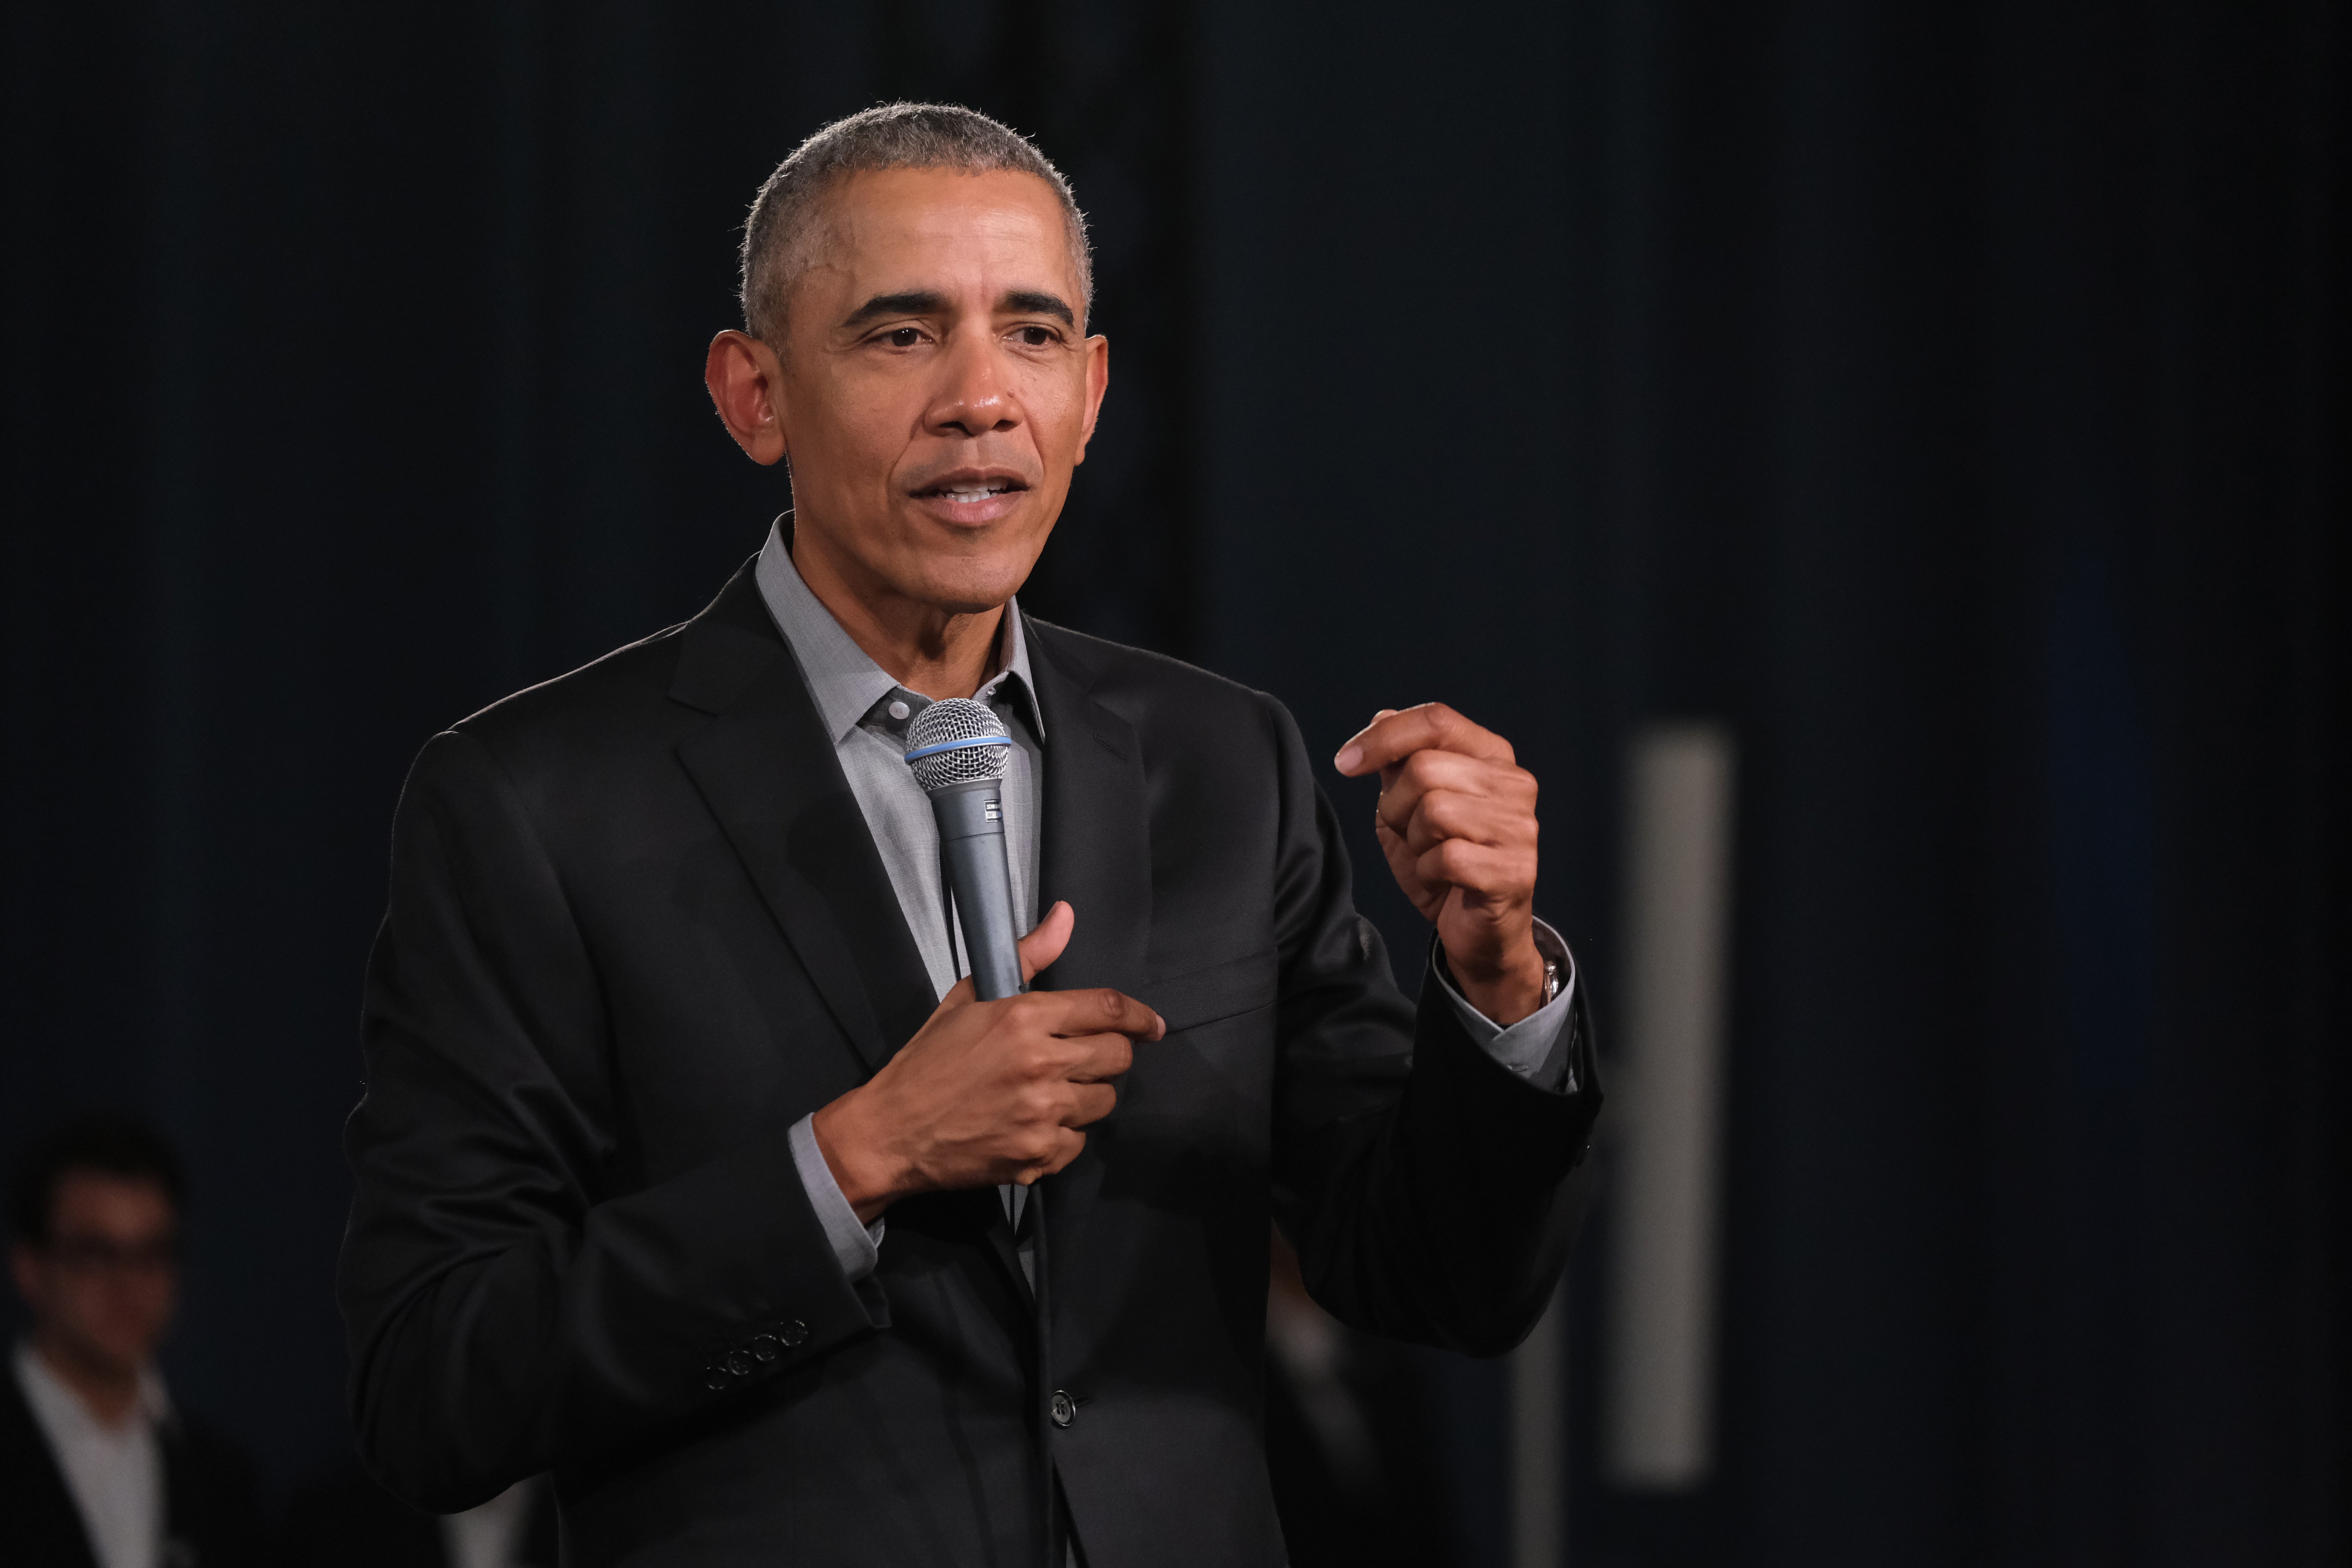 Former U.S. President Barack Obama at a Town Hall-styled session on Apr. 06, 2019 in Berlin, Germany | Photo: Getty Images